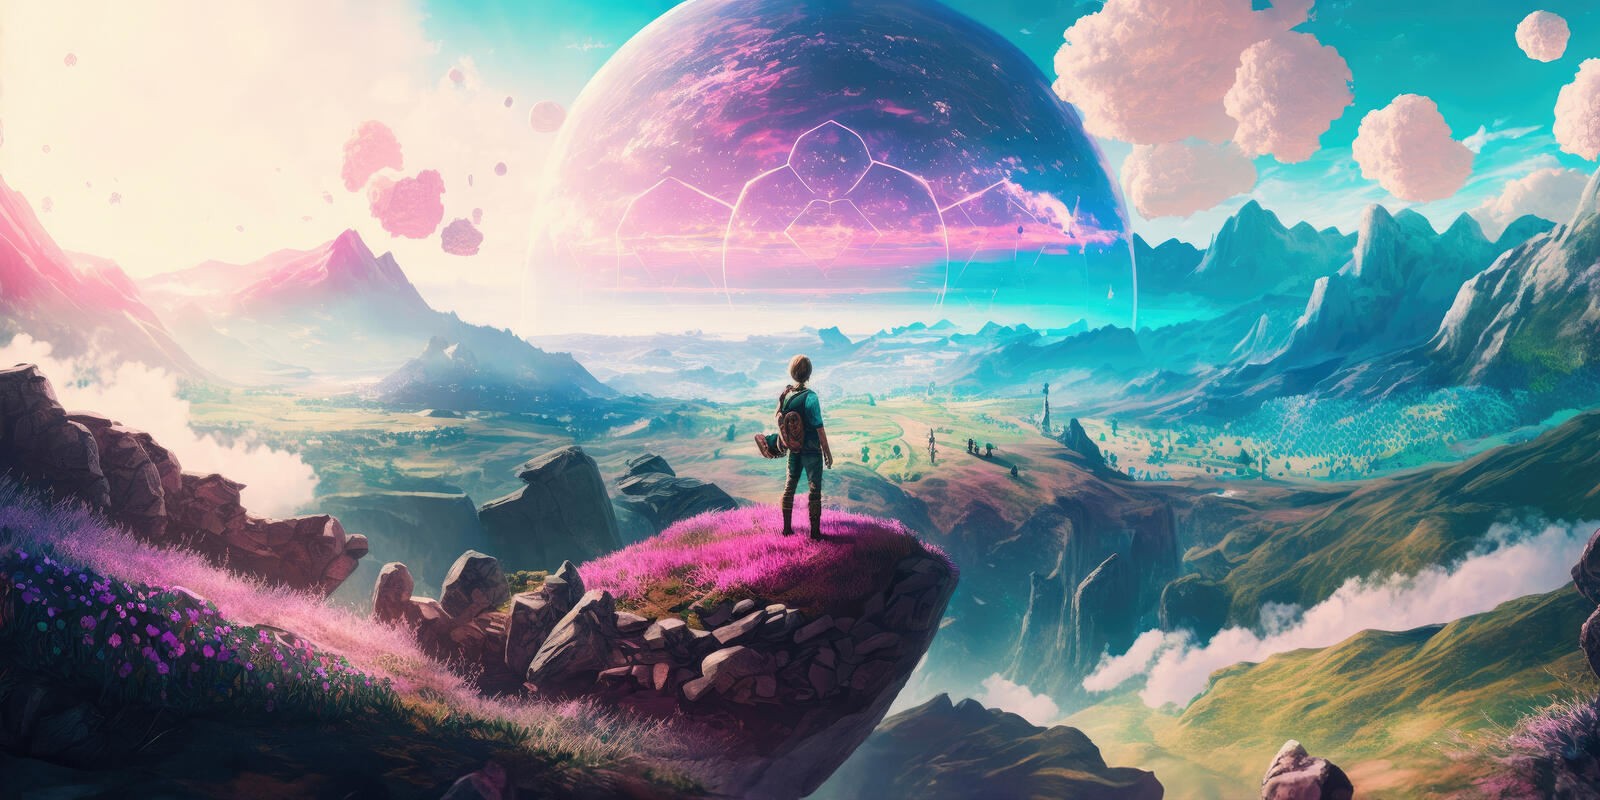 Free photo A fantasy landscape on a mountain with flowers and a planet over the horizon